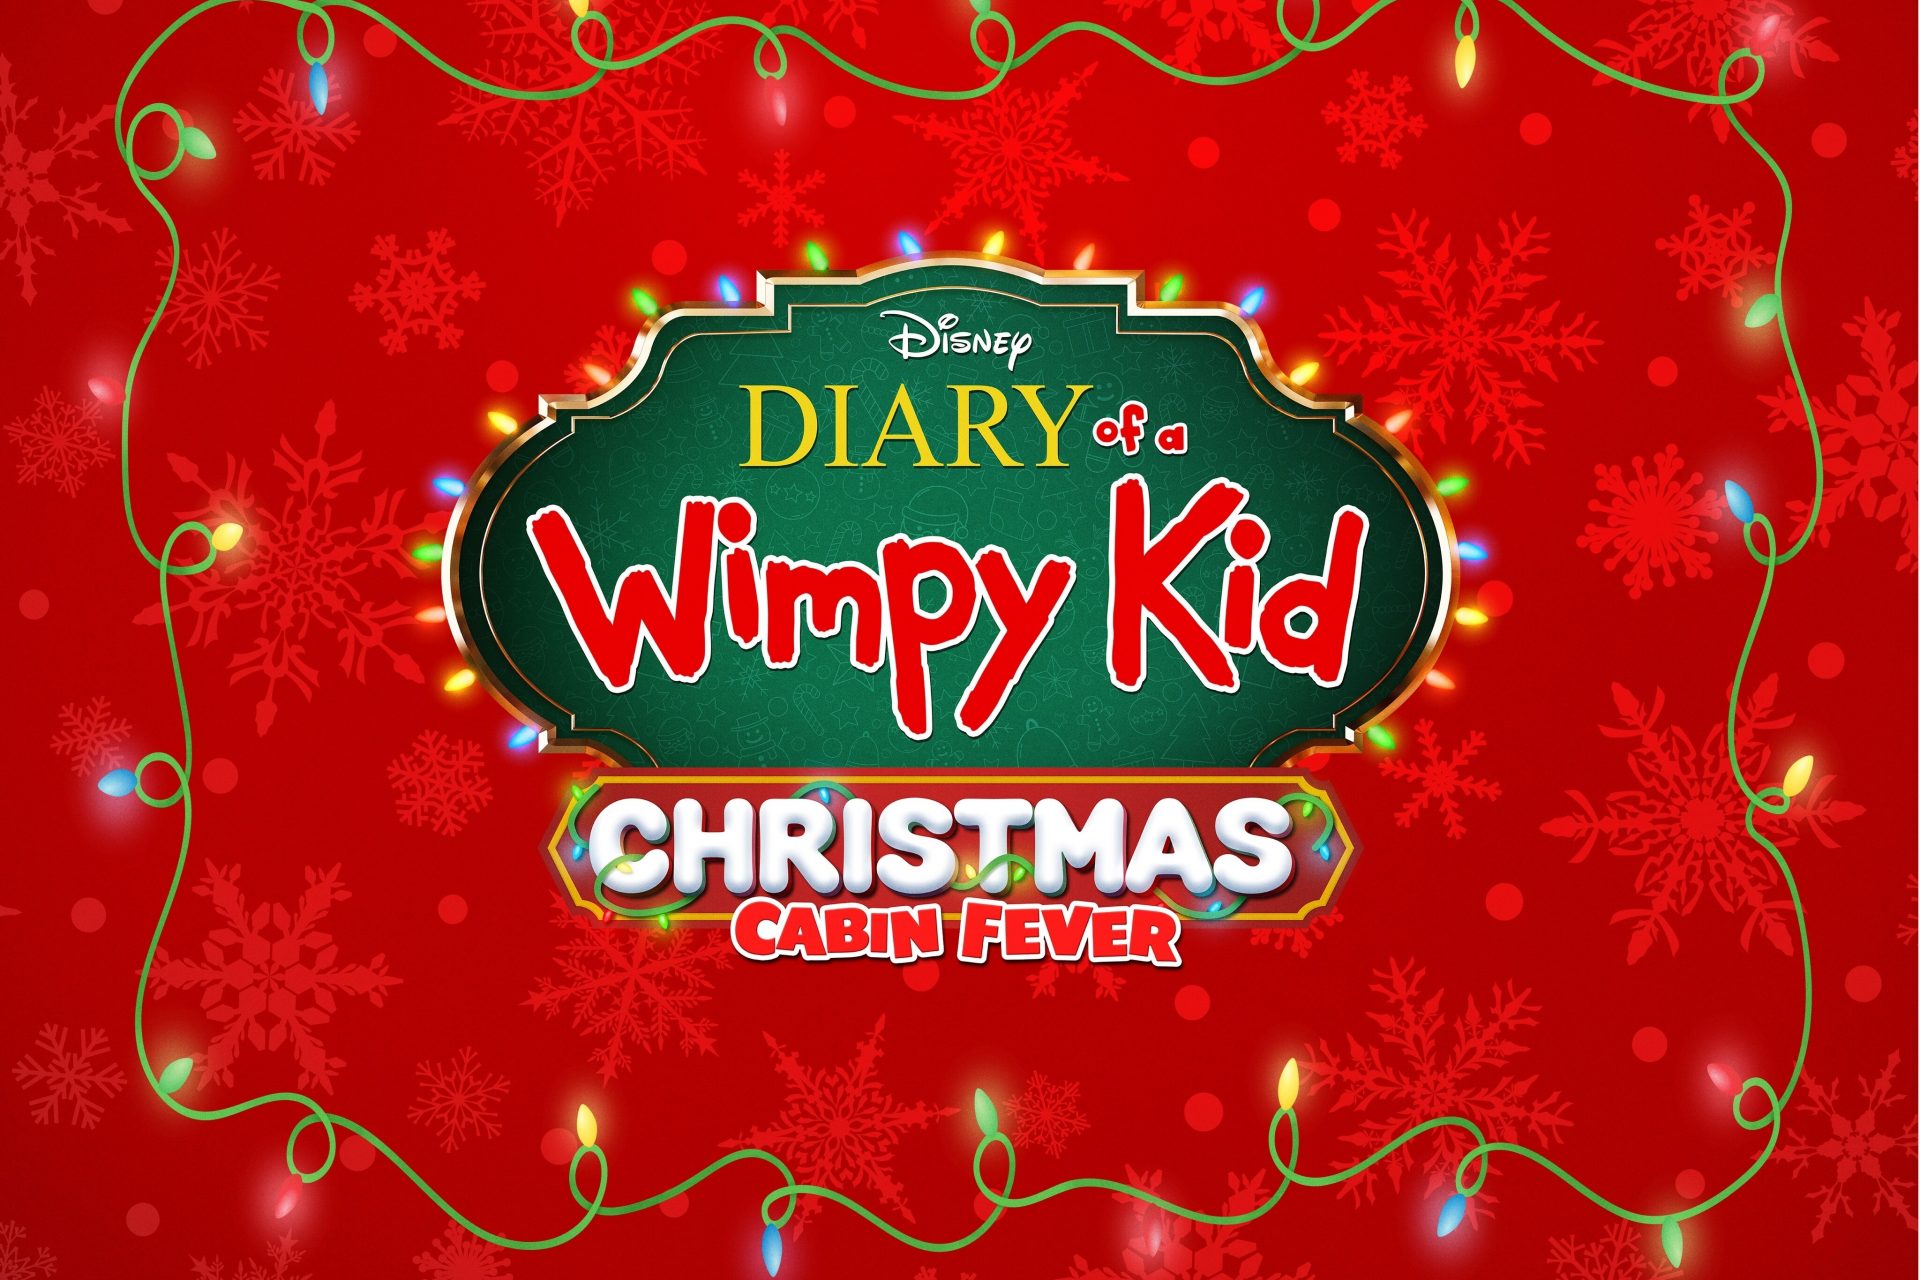 Diary of a Wimpy Kid Christmas: Cabin Fever - December 8 (Disney+)